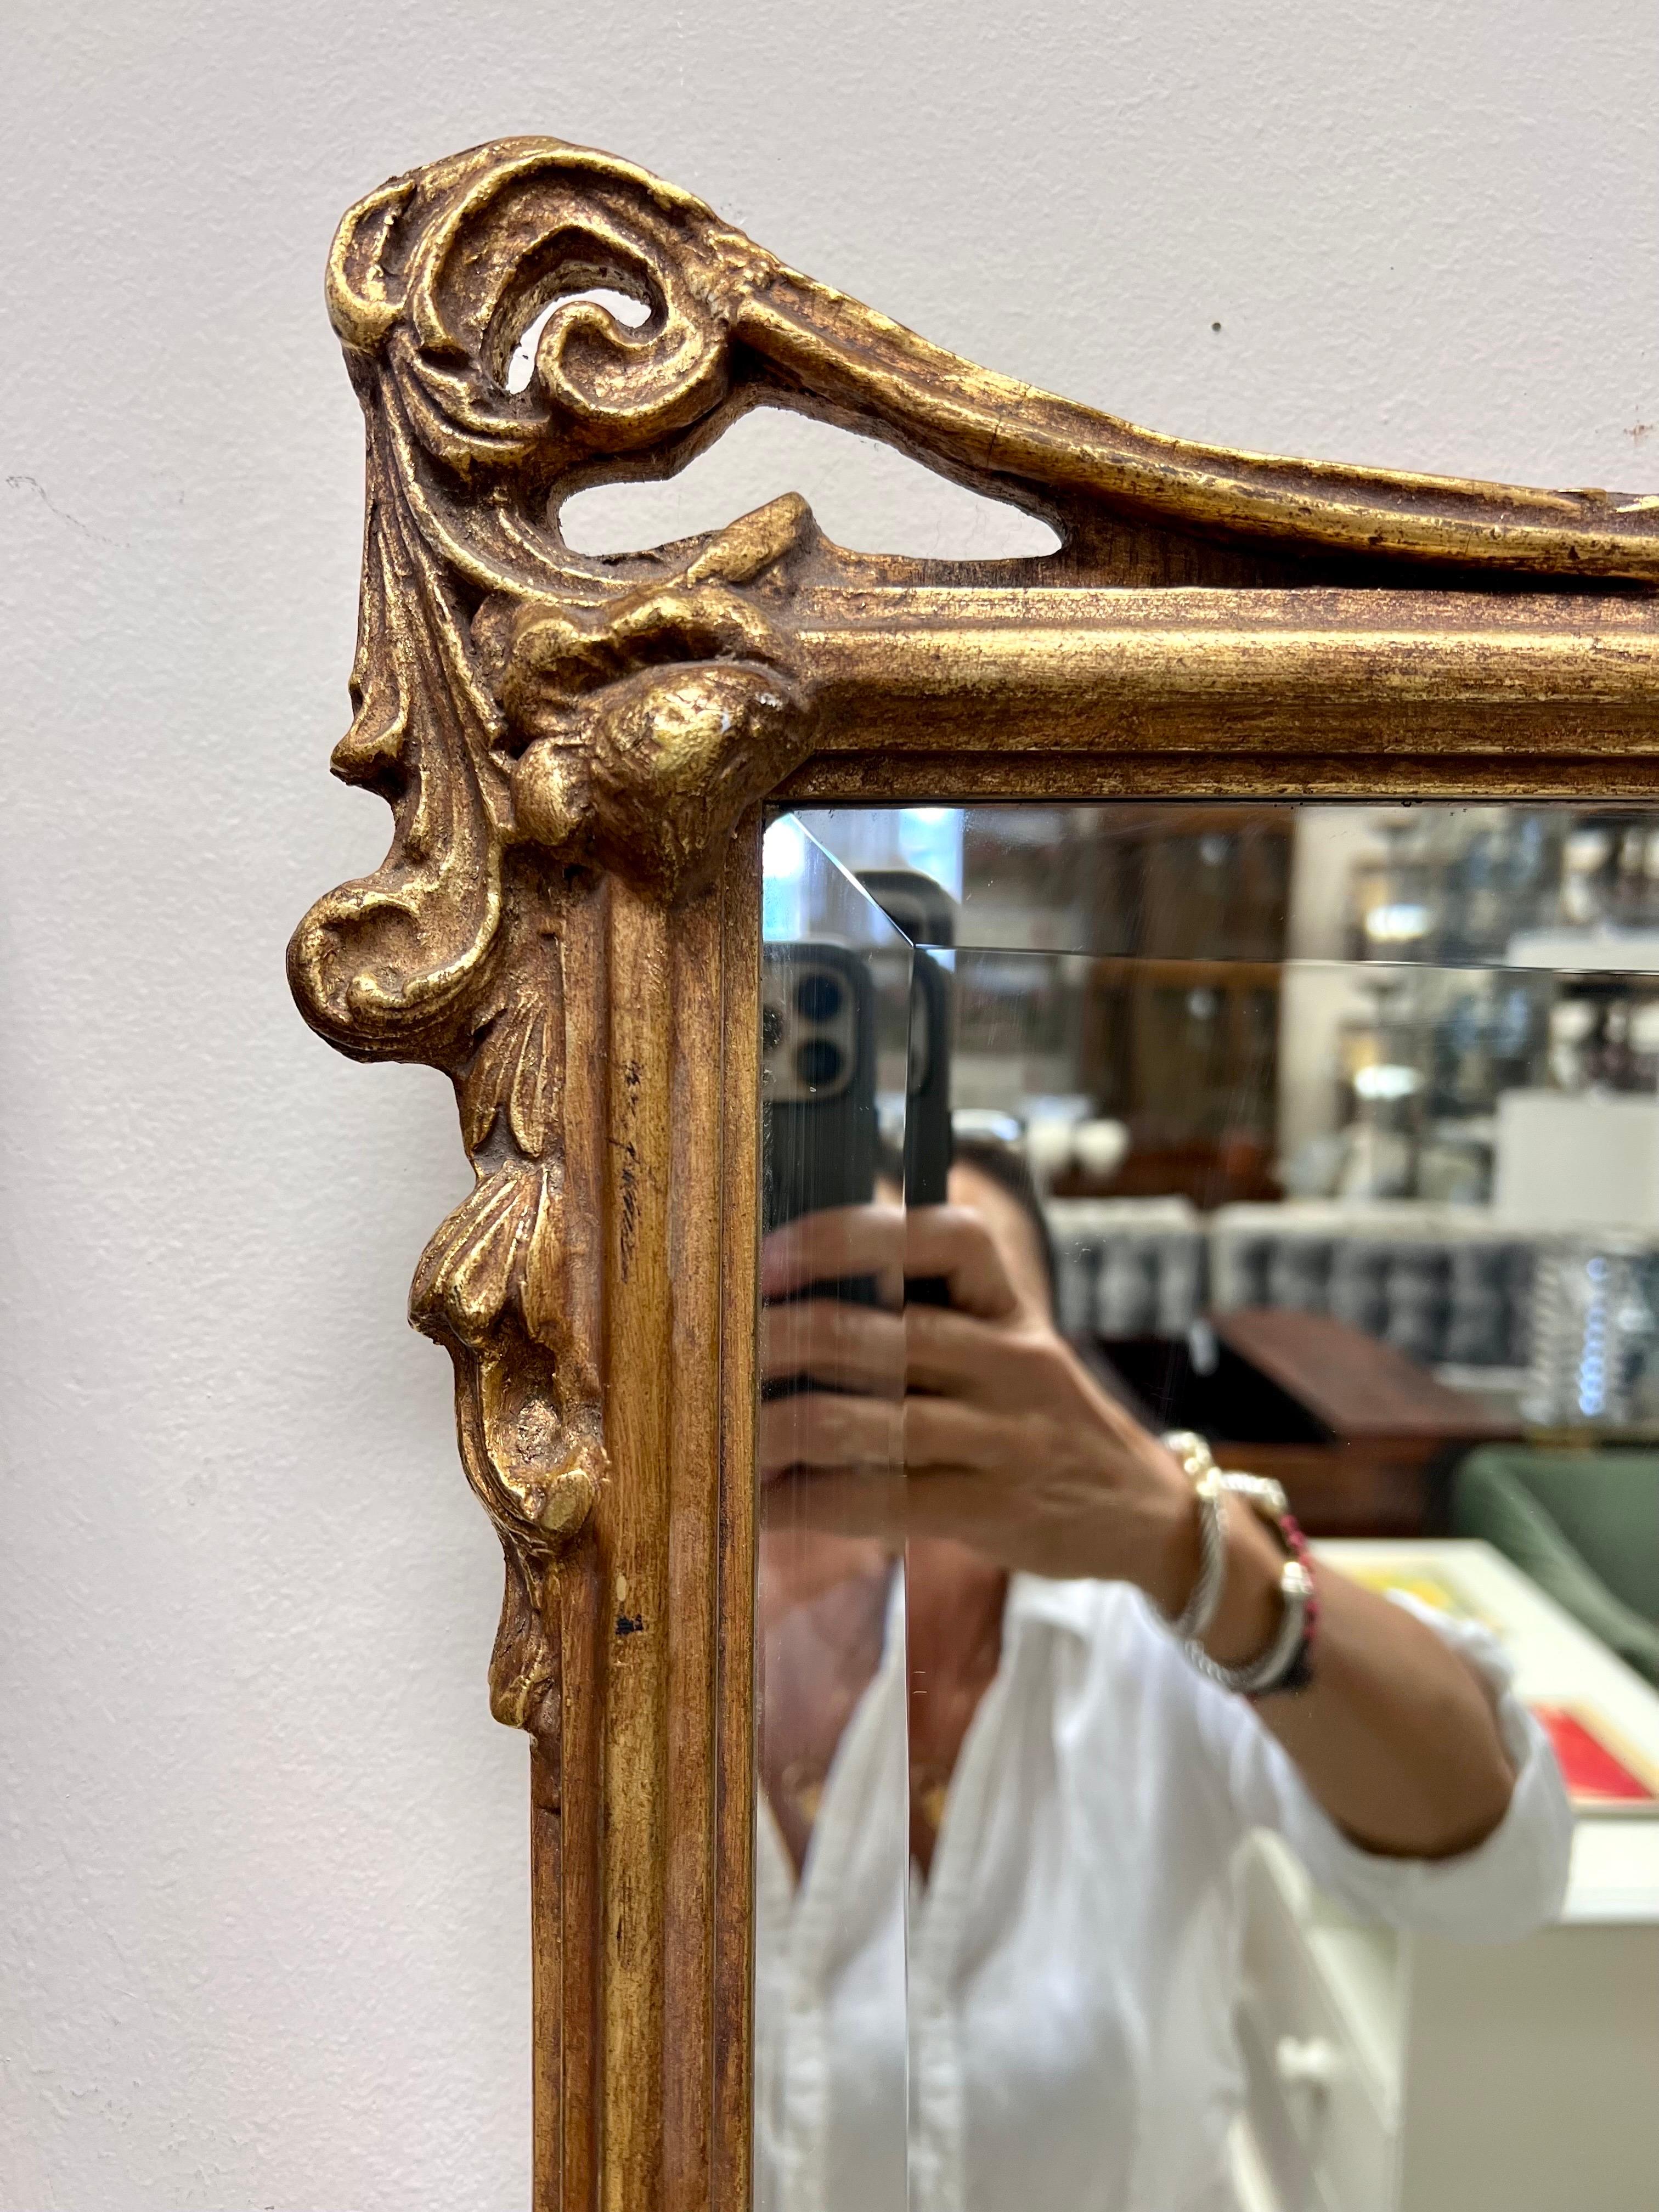 Signed Friedman Brothers for Decorative Arts, Inc. giltwood wall mirror that is ready to hang.  What makes the FB mirrors so sought after is the intricate carvings and exceptional craftsmanship.  Made in Italy.  Enjoy!  Why not own the best?